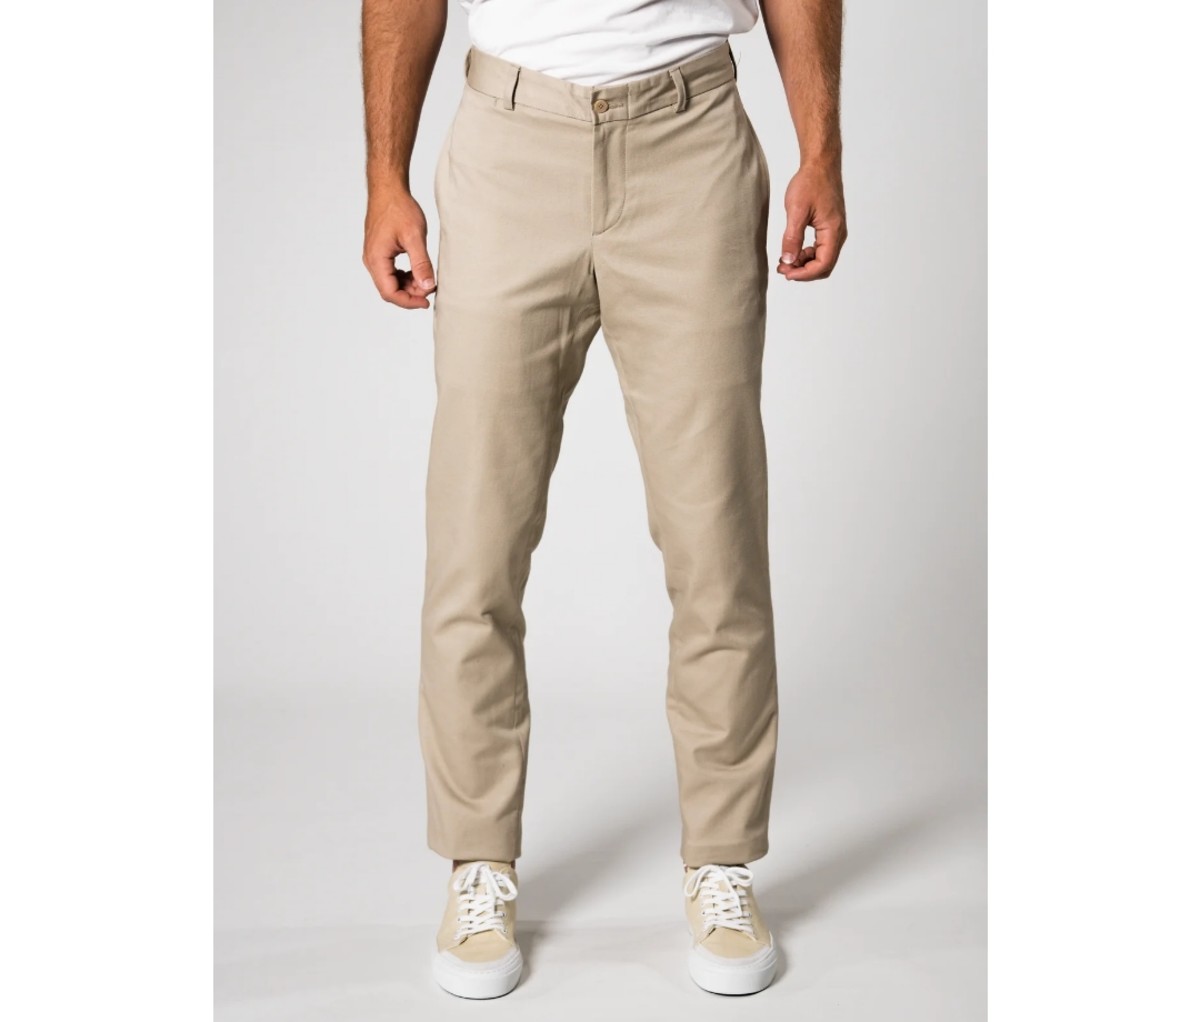 Discover more than 87 high quality khaki pants - in.eteachers